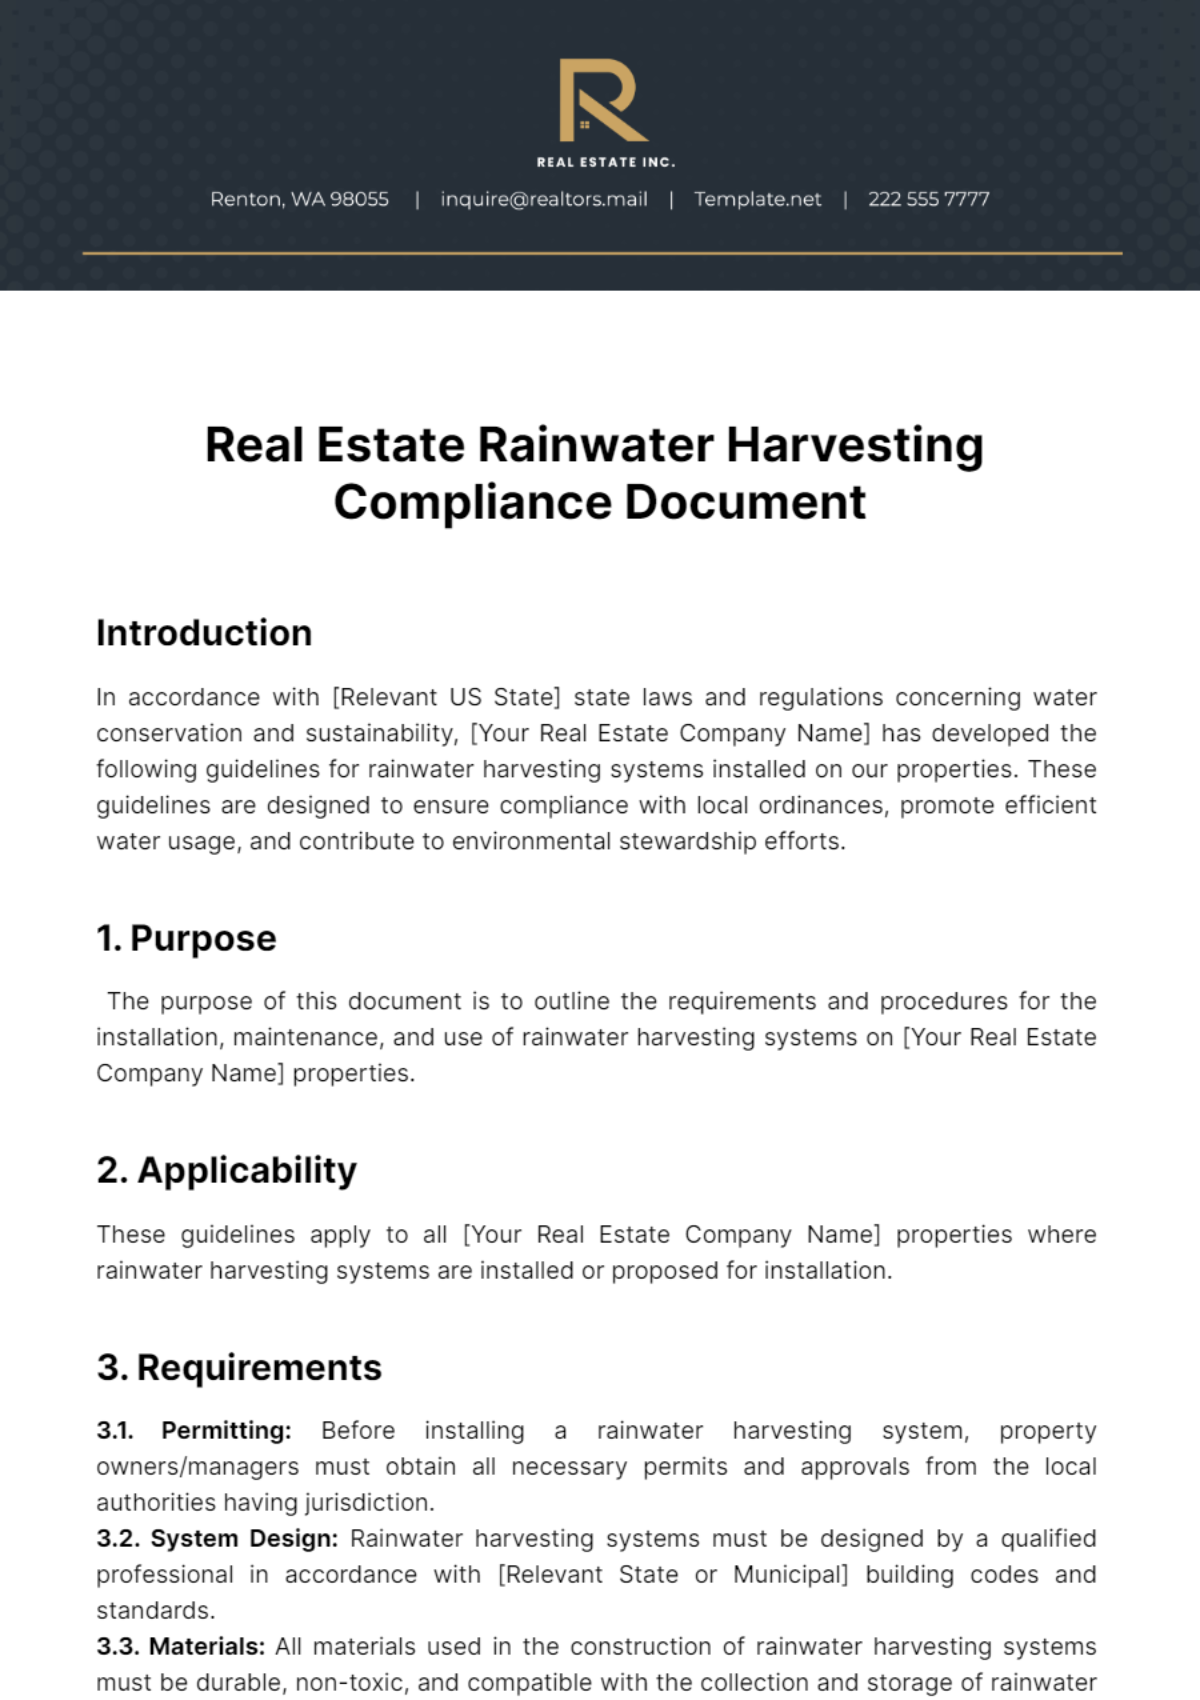 Free Real Estate Rainwater Harvesting Compliance Document Template